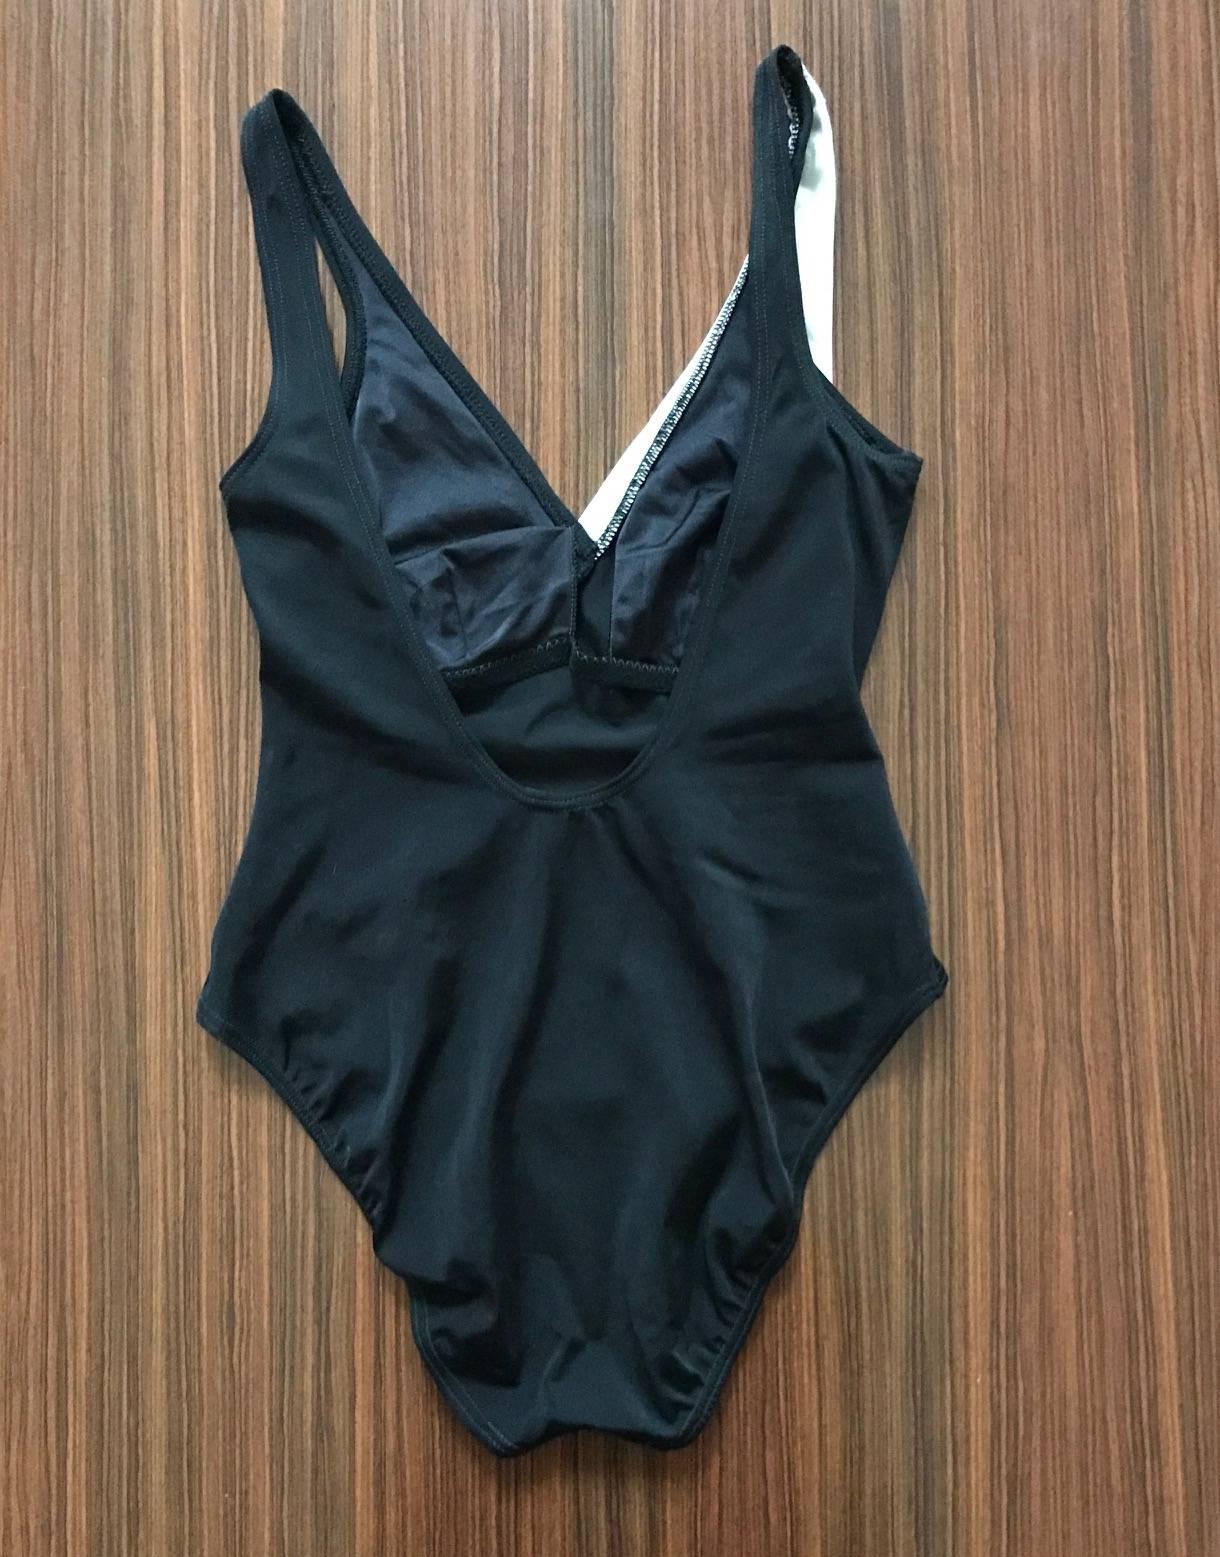 Yves Saint Laurent black one piece swimsuit with asymmetrical white collar detail and four faceted buttons at front. Super flattering high cut legs and scoop back. 

Content/size label removed. 

Best fits size S, see measurements. Stretchy,